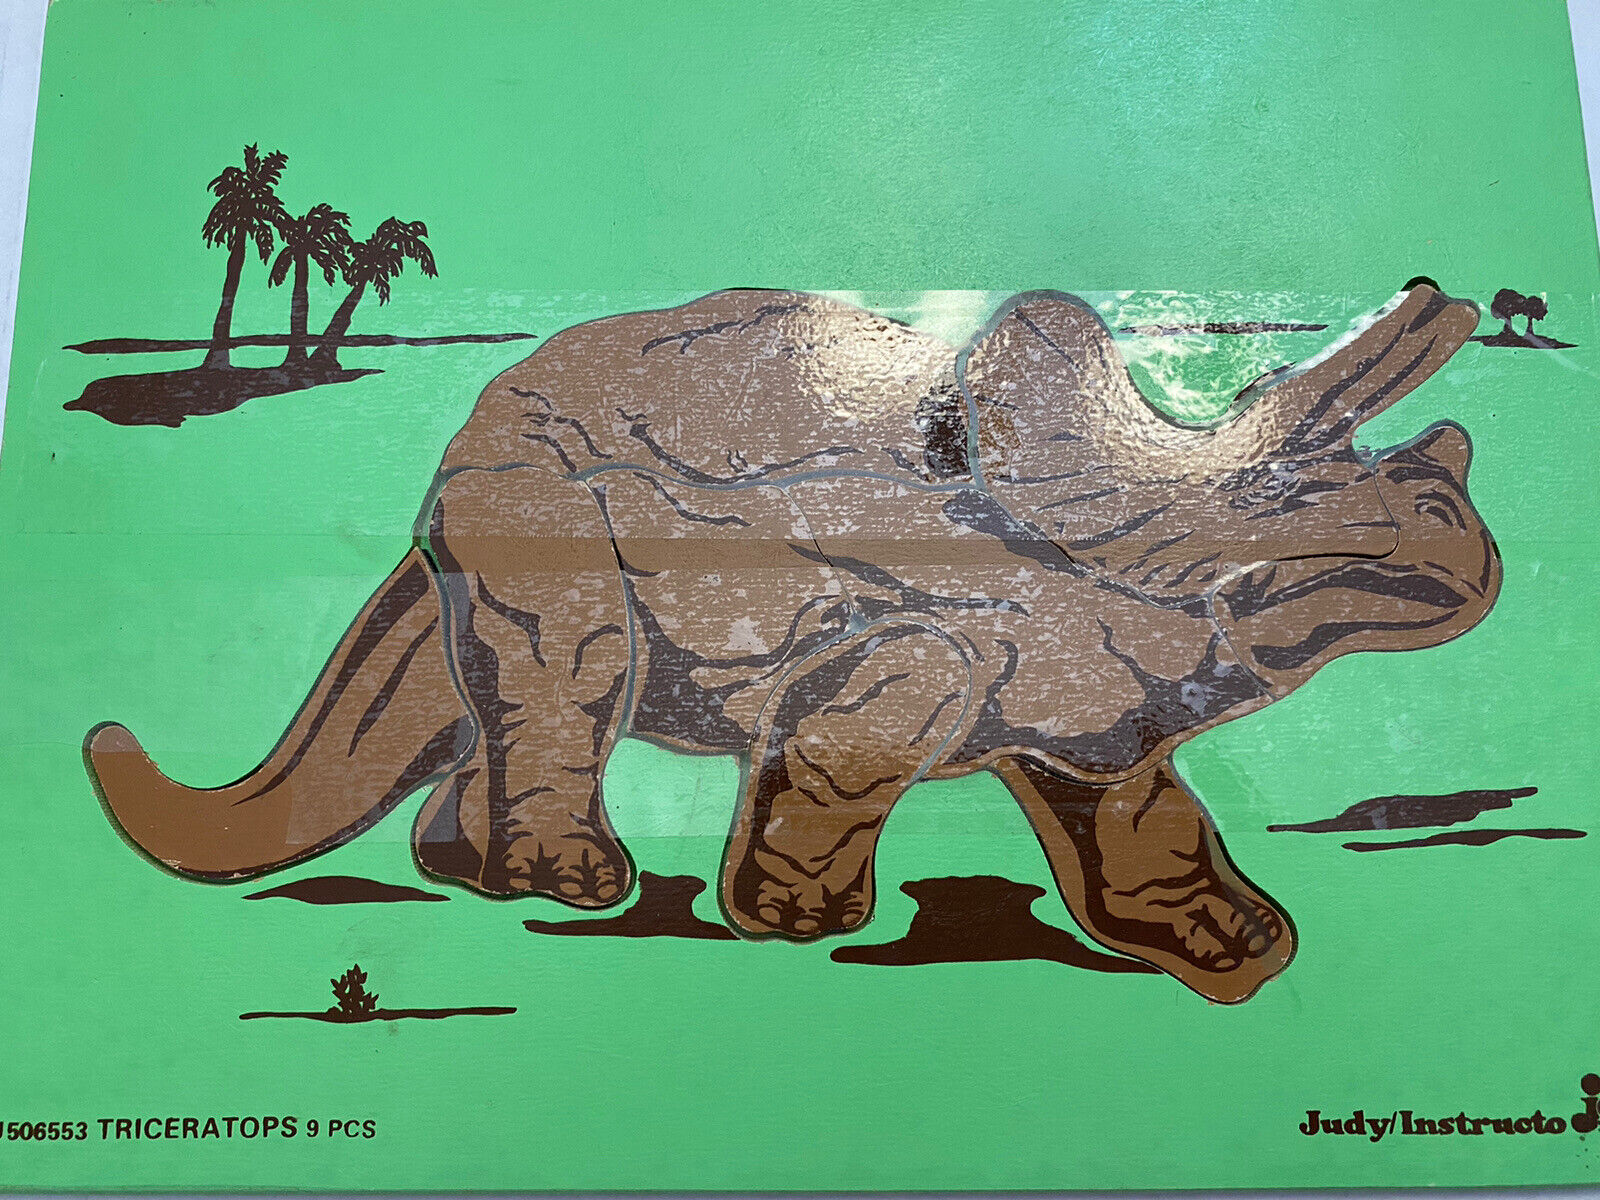 VTG TRICERATOPS Dinosaur WOODEN TRAY PUZZLE By Judy Instructo 9 Pieces 9 X 12